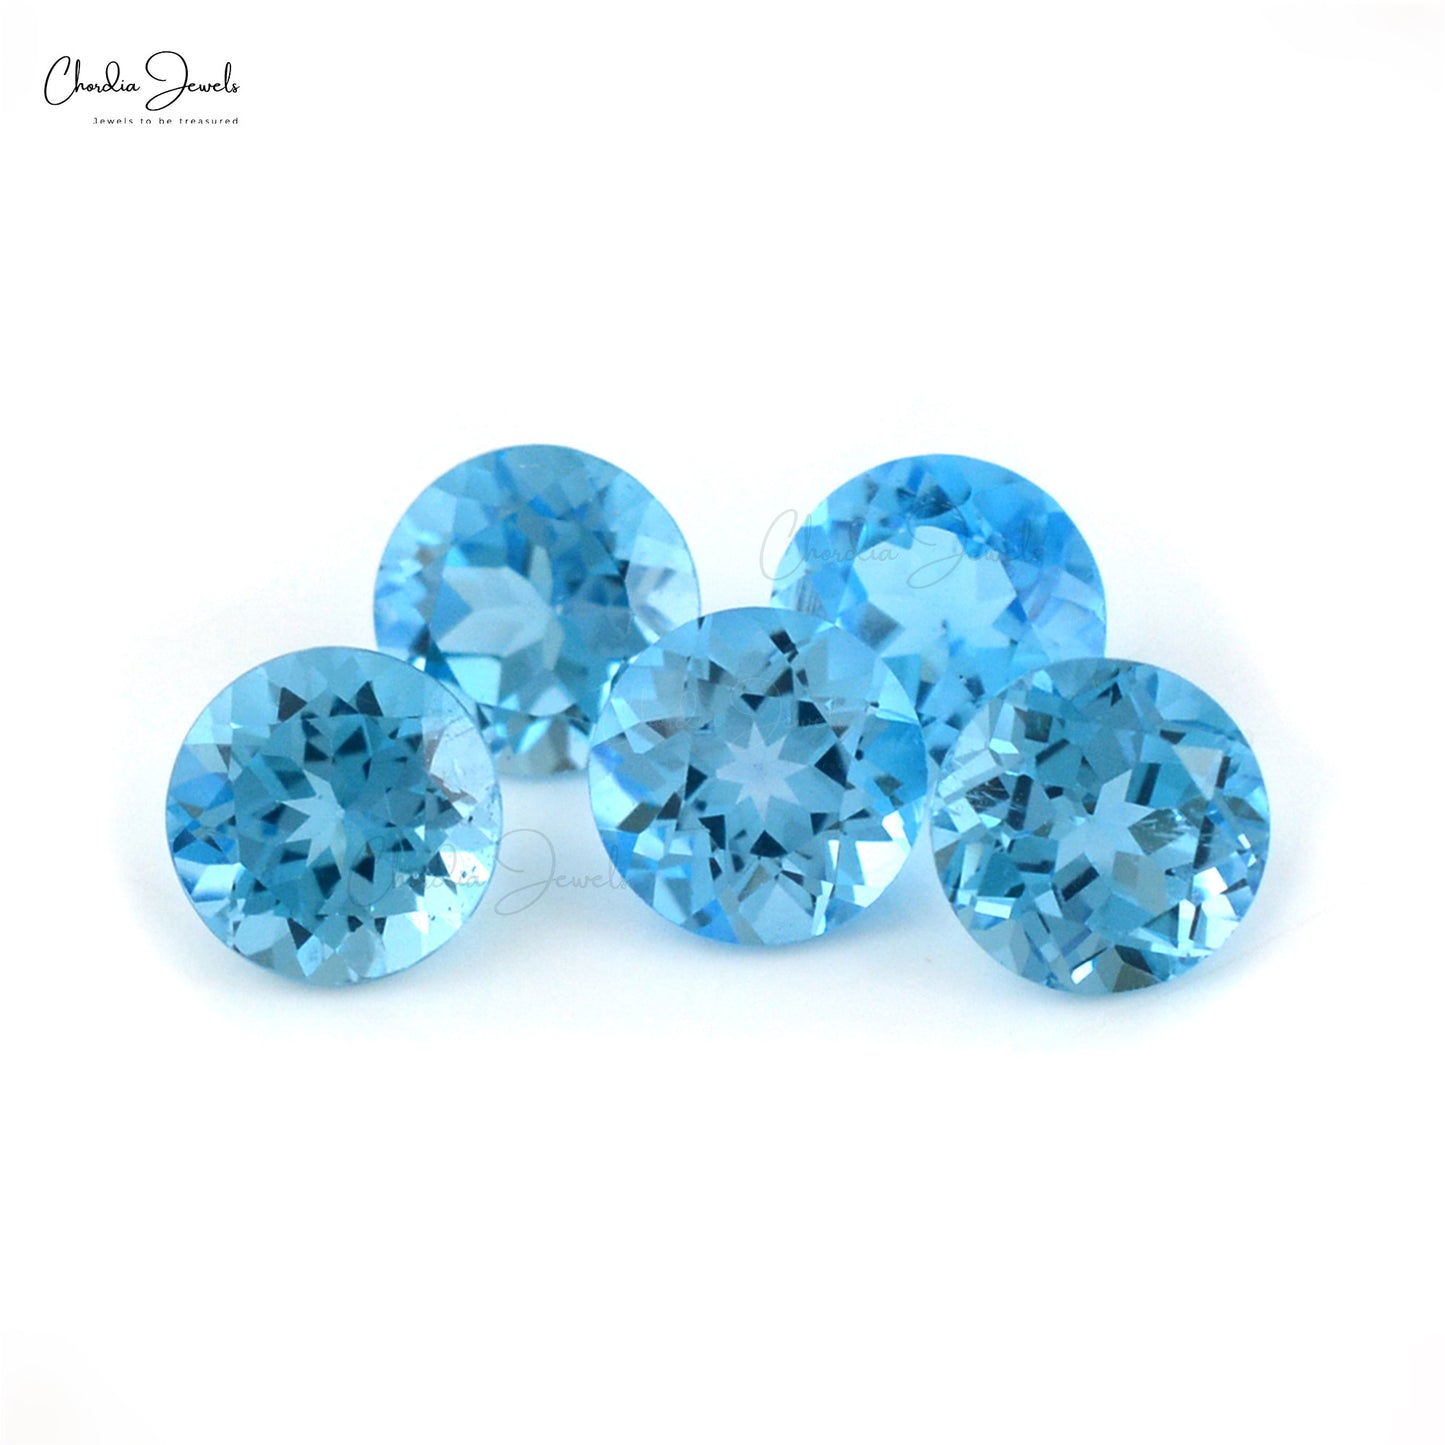 100% Natural High Quality Swiss Blue Topaz Round Faceted Gemstone, 1 Piece